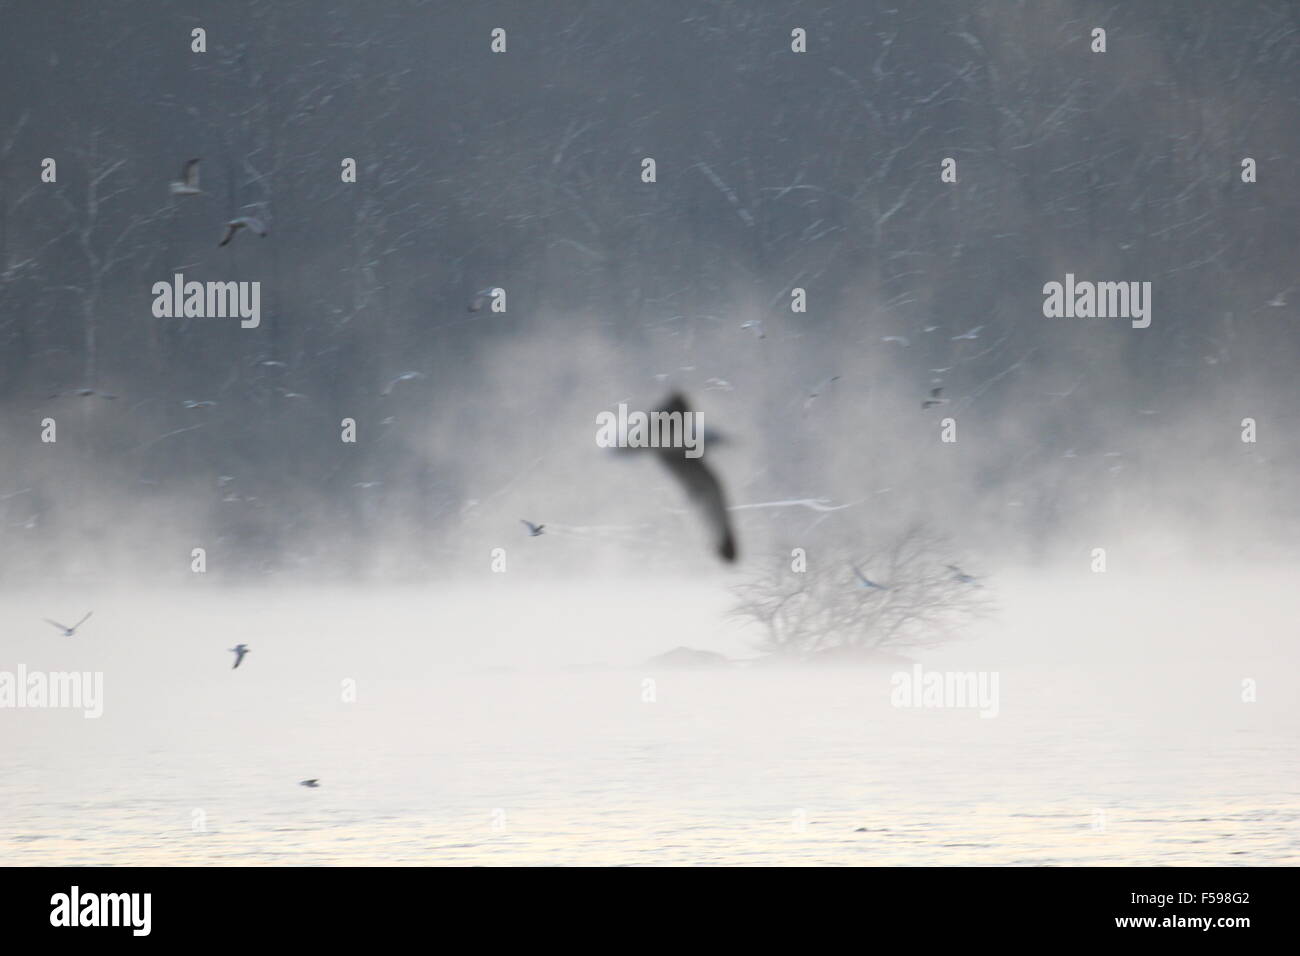 Out-of-focus seagulls on the Susquehanna River, MD, USA. Stock Photo